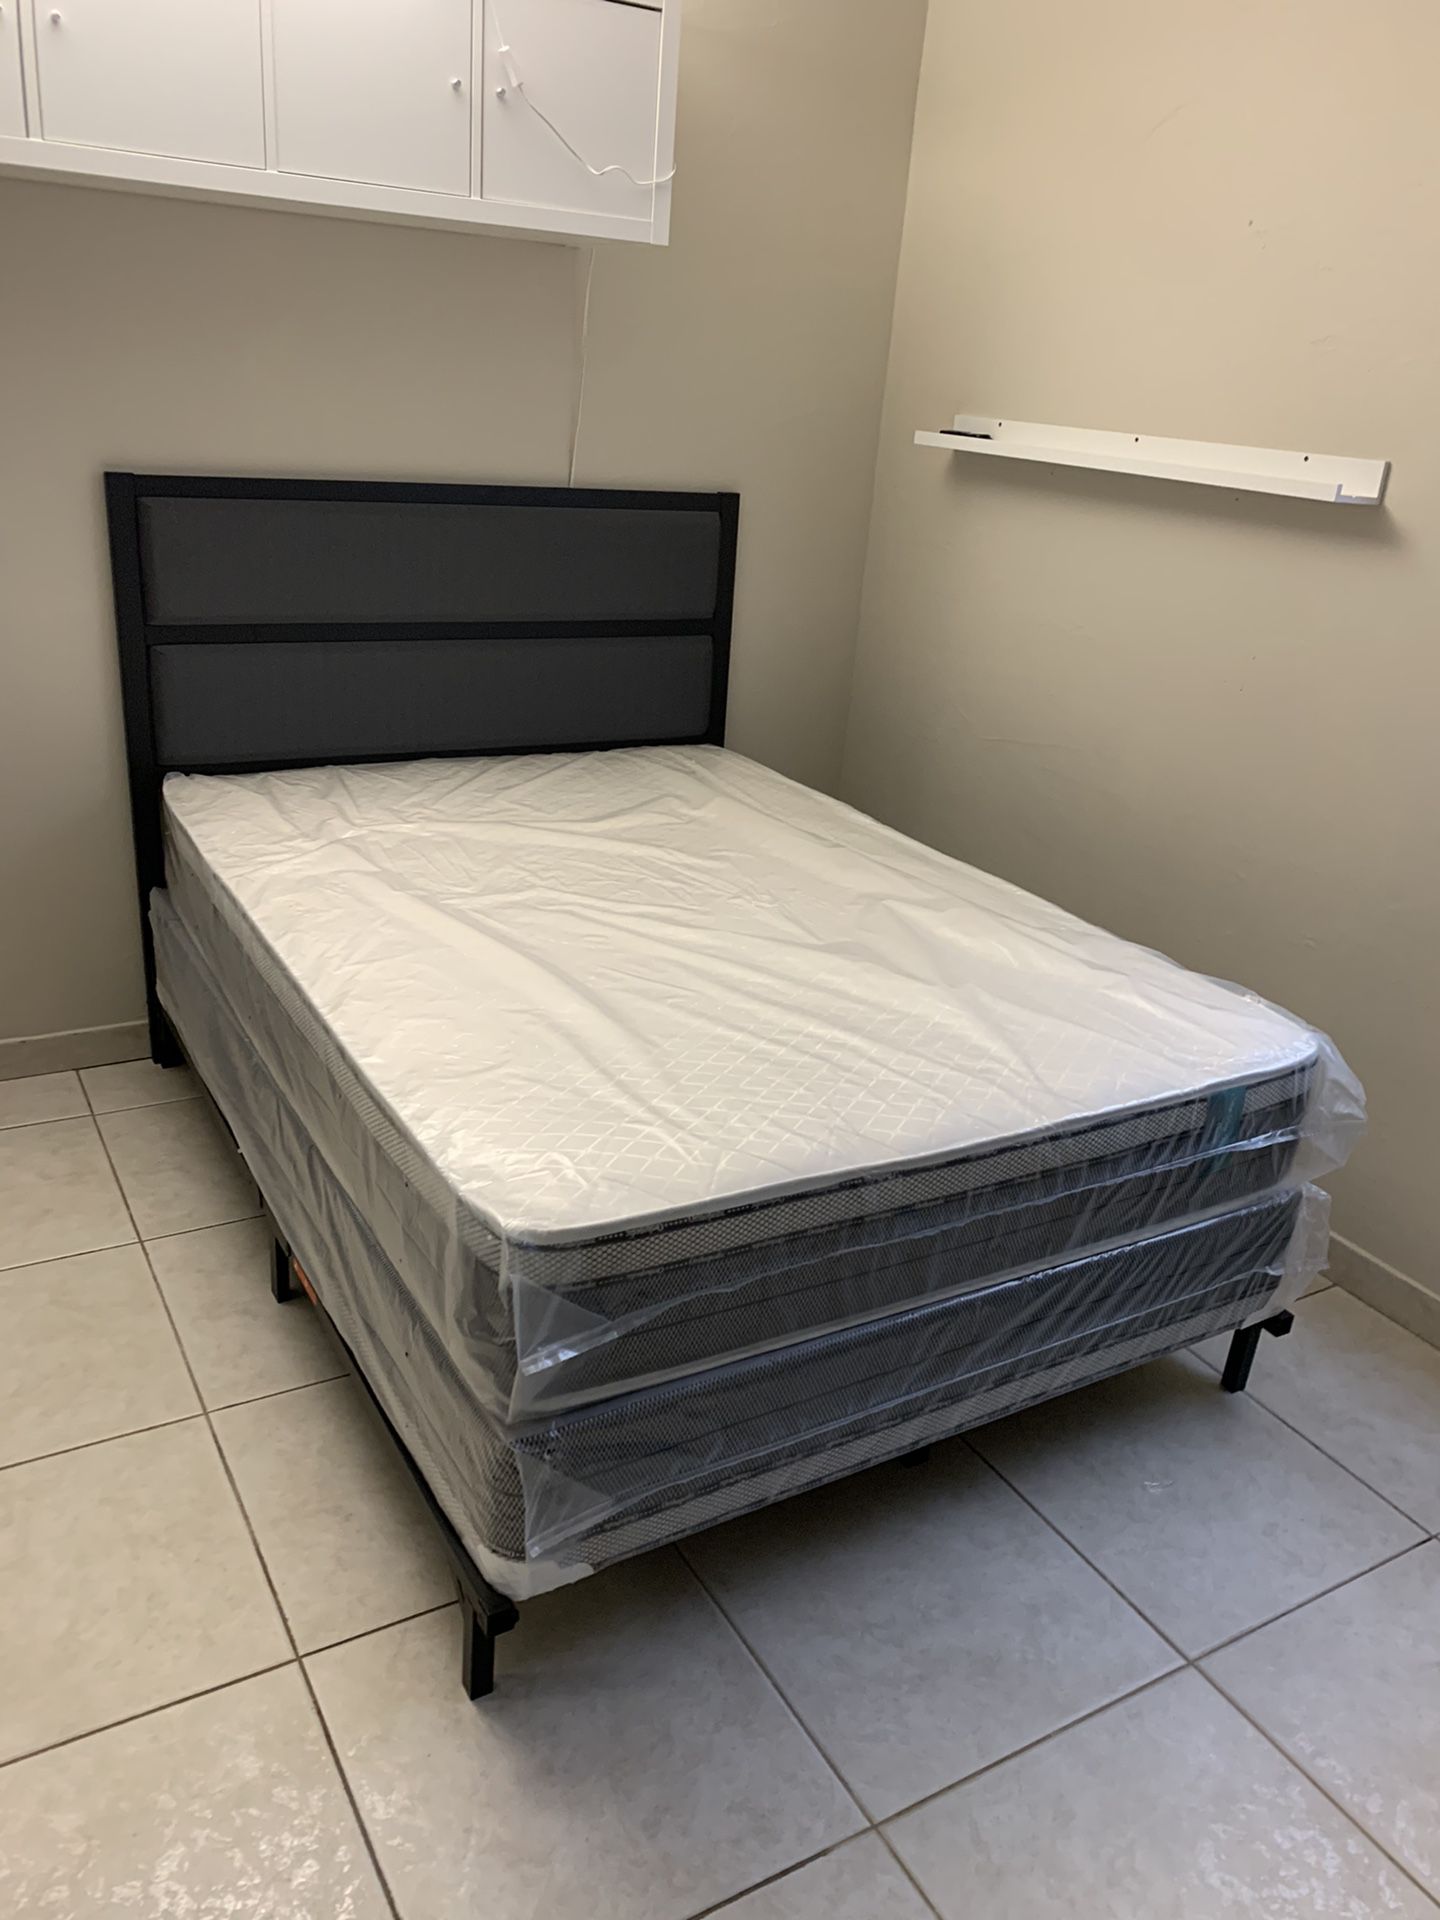 New mattresses and box springs FREE DELIVERY 🚚 TWIN 130 full 140 queen 150 king 200